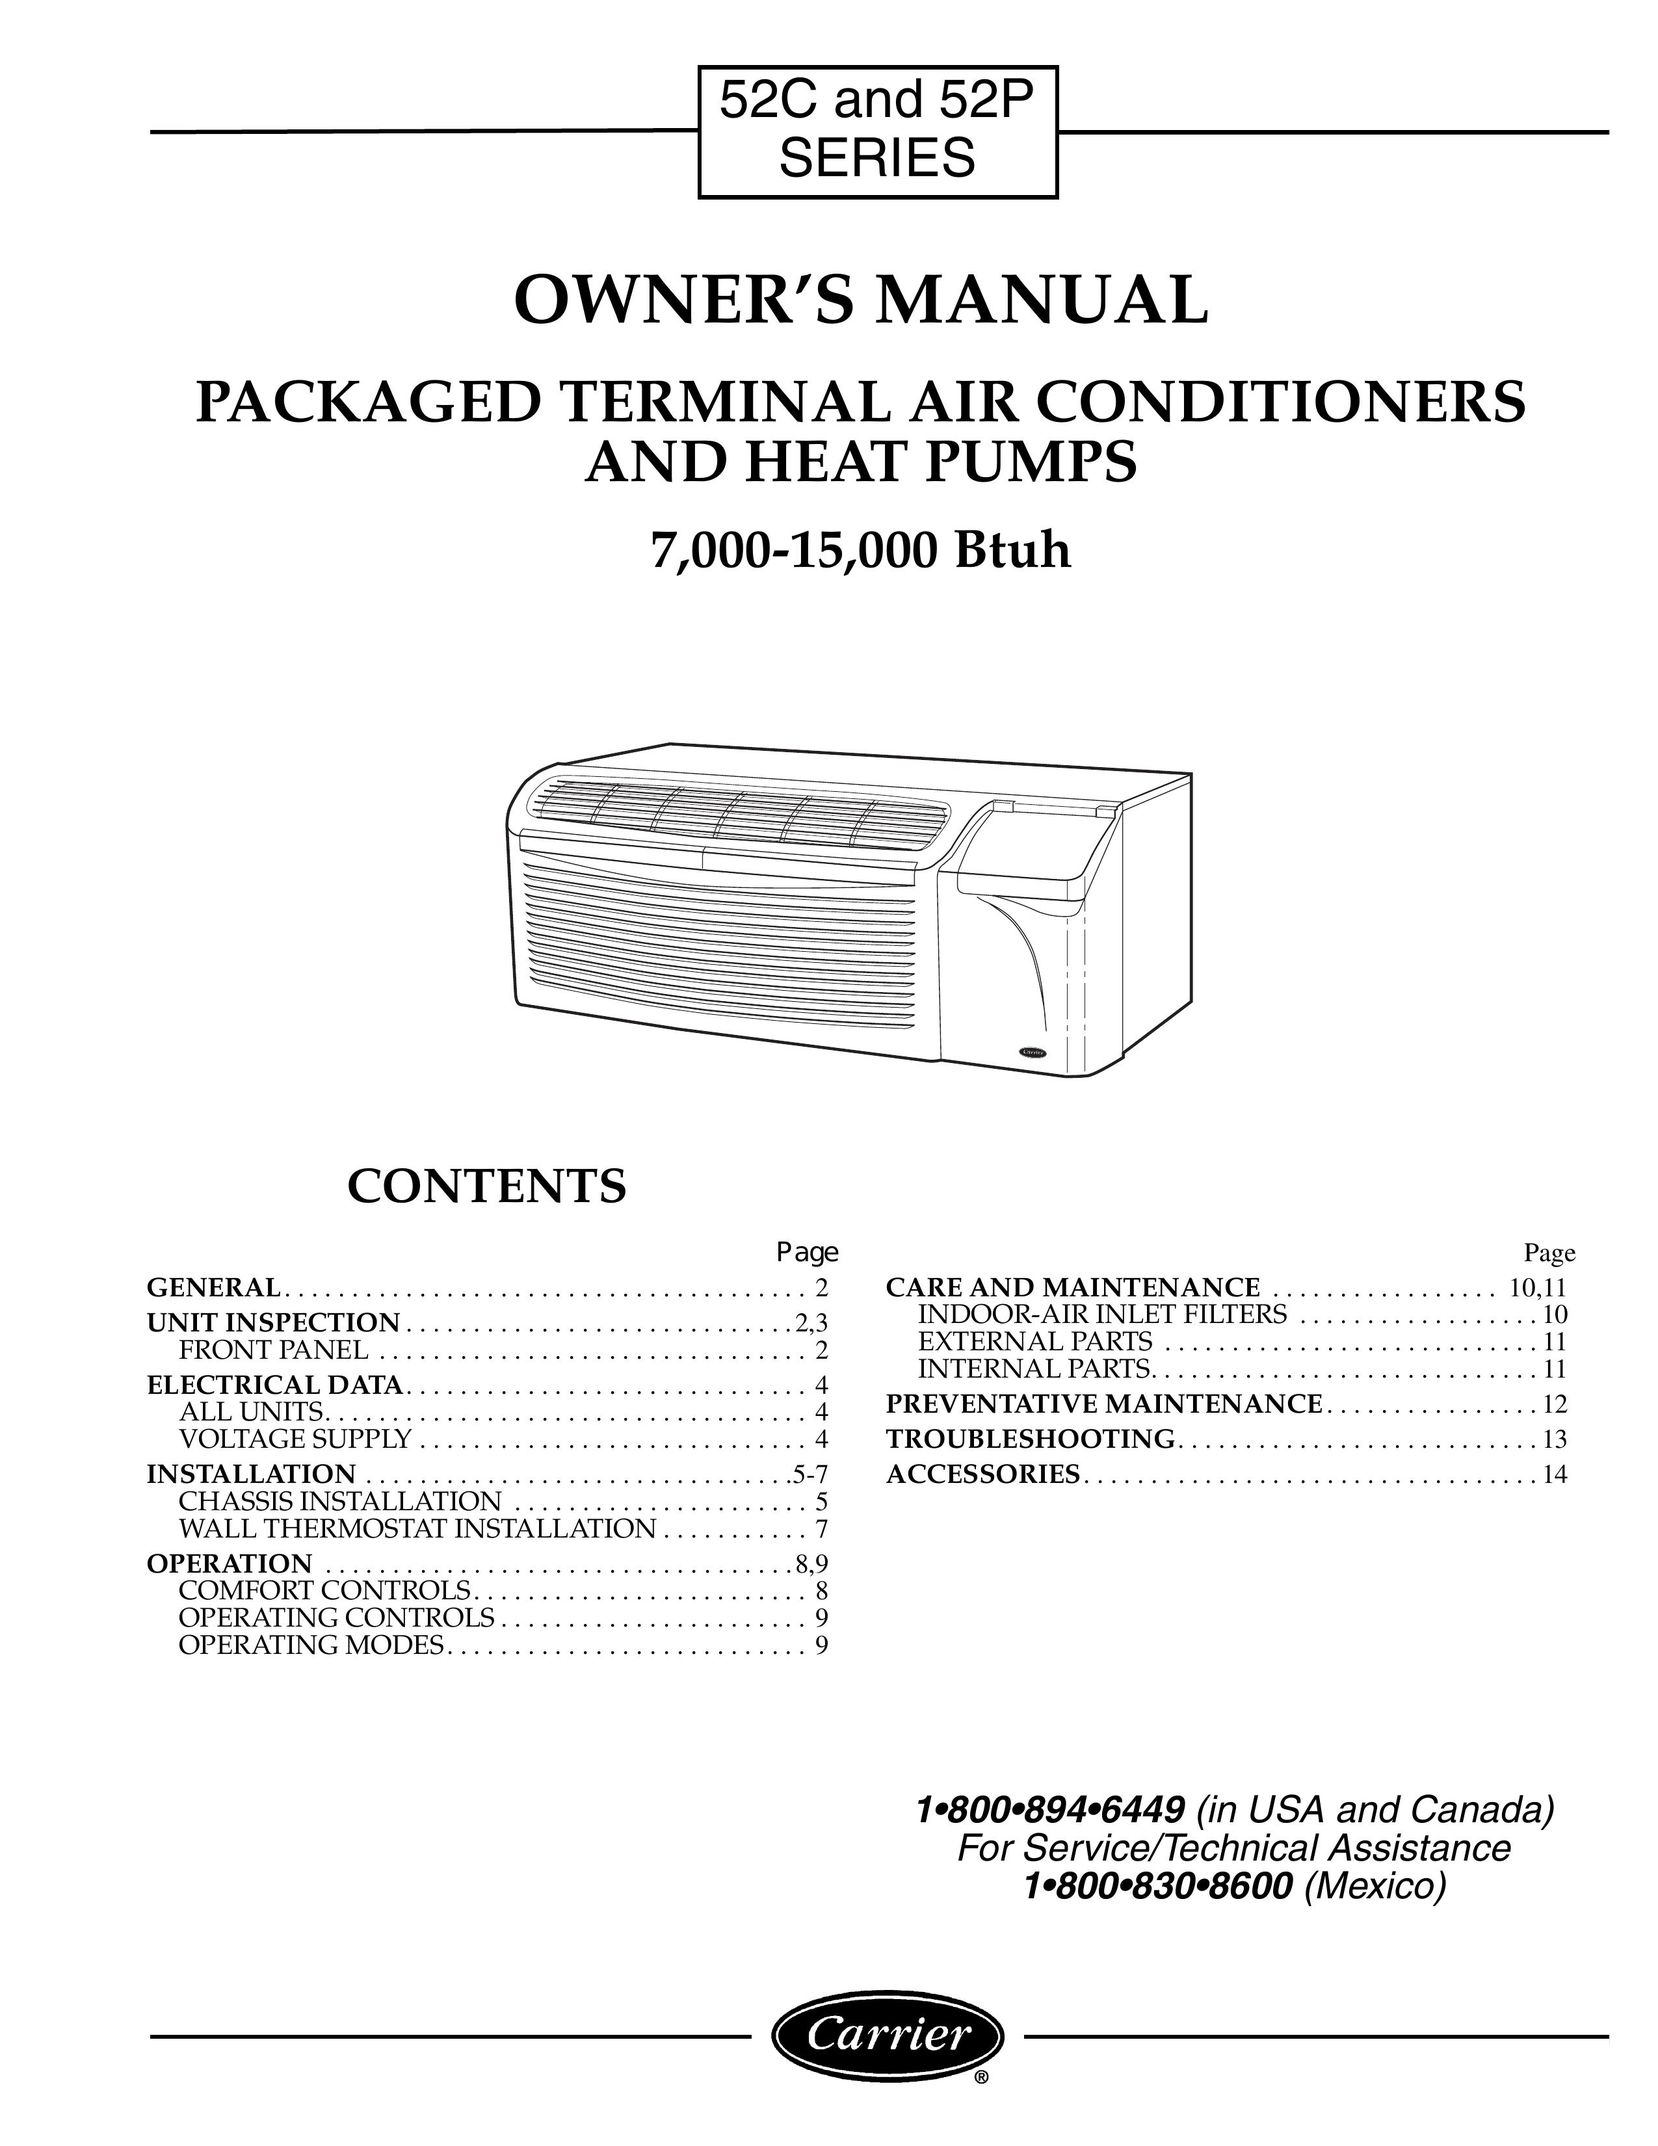 Carrier Access 52P Air Conditioner User Manual